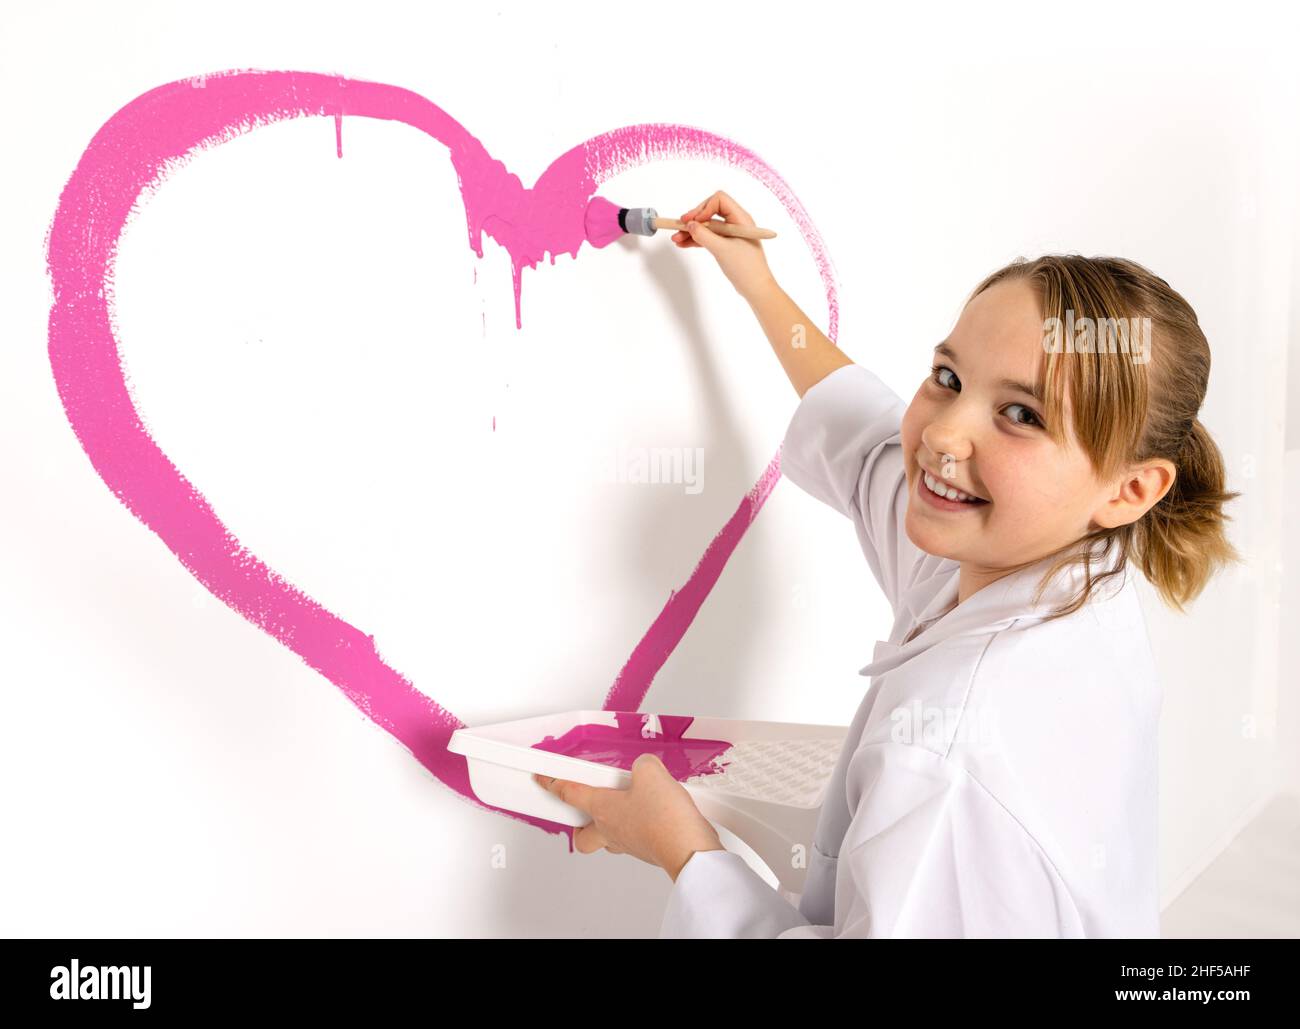 Young 10 years old girl painting a pink heart with a brush on the wall. The girl is looking into camera with a happy smile. Stock Photo